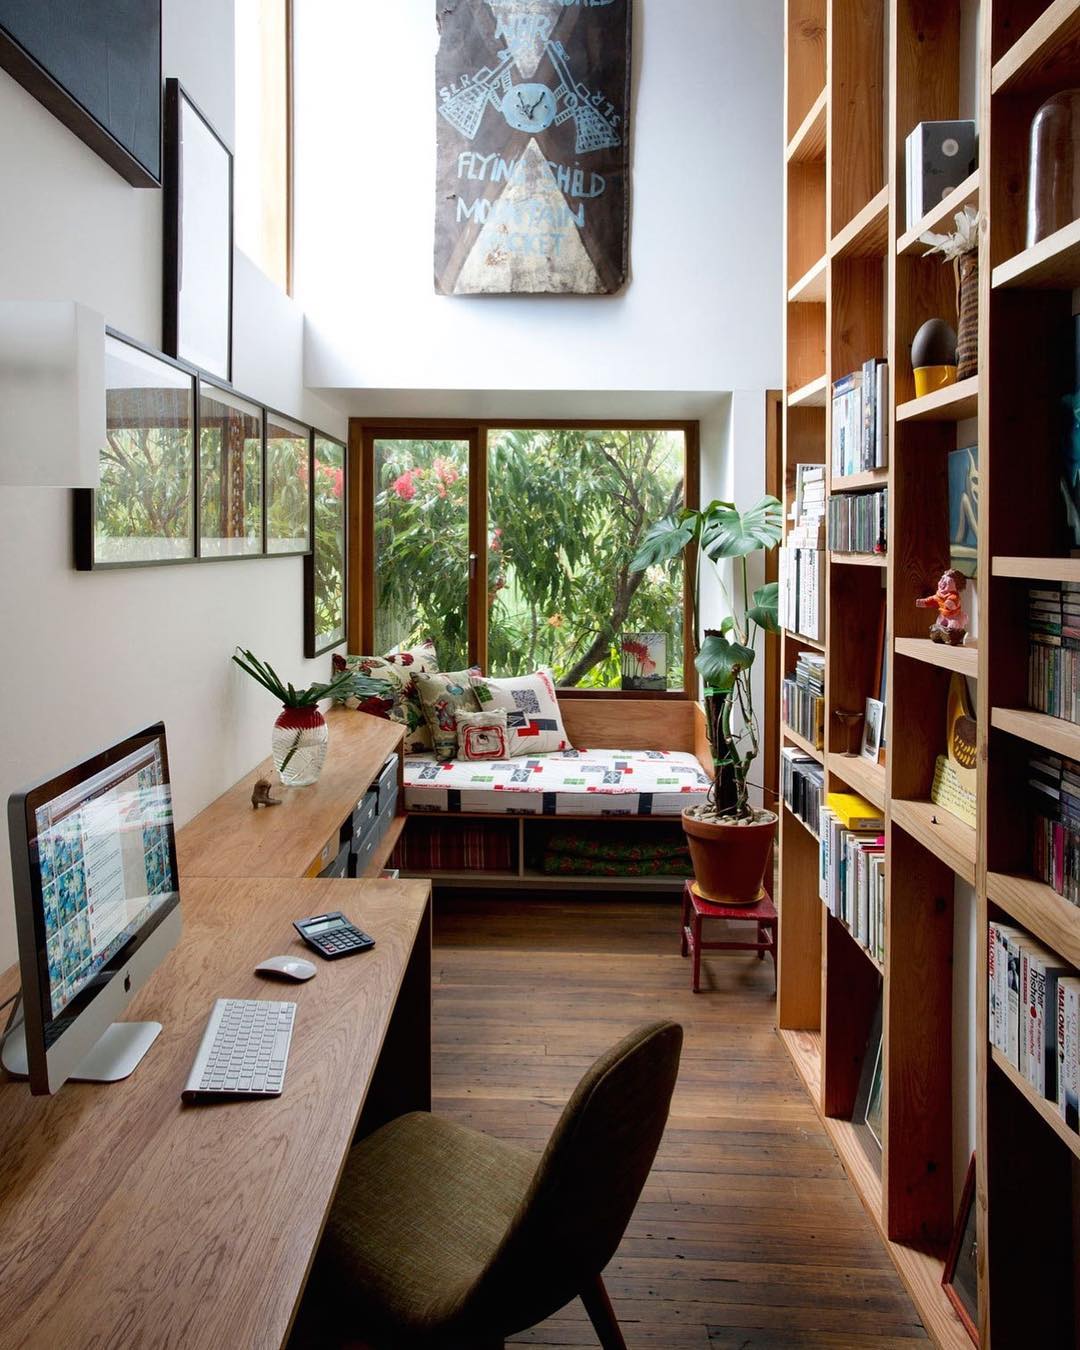 Library home office space. Photo by Instagram user @boho_aroha